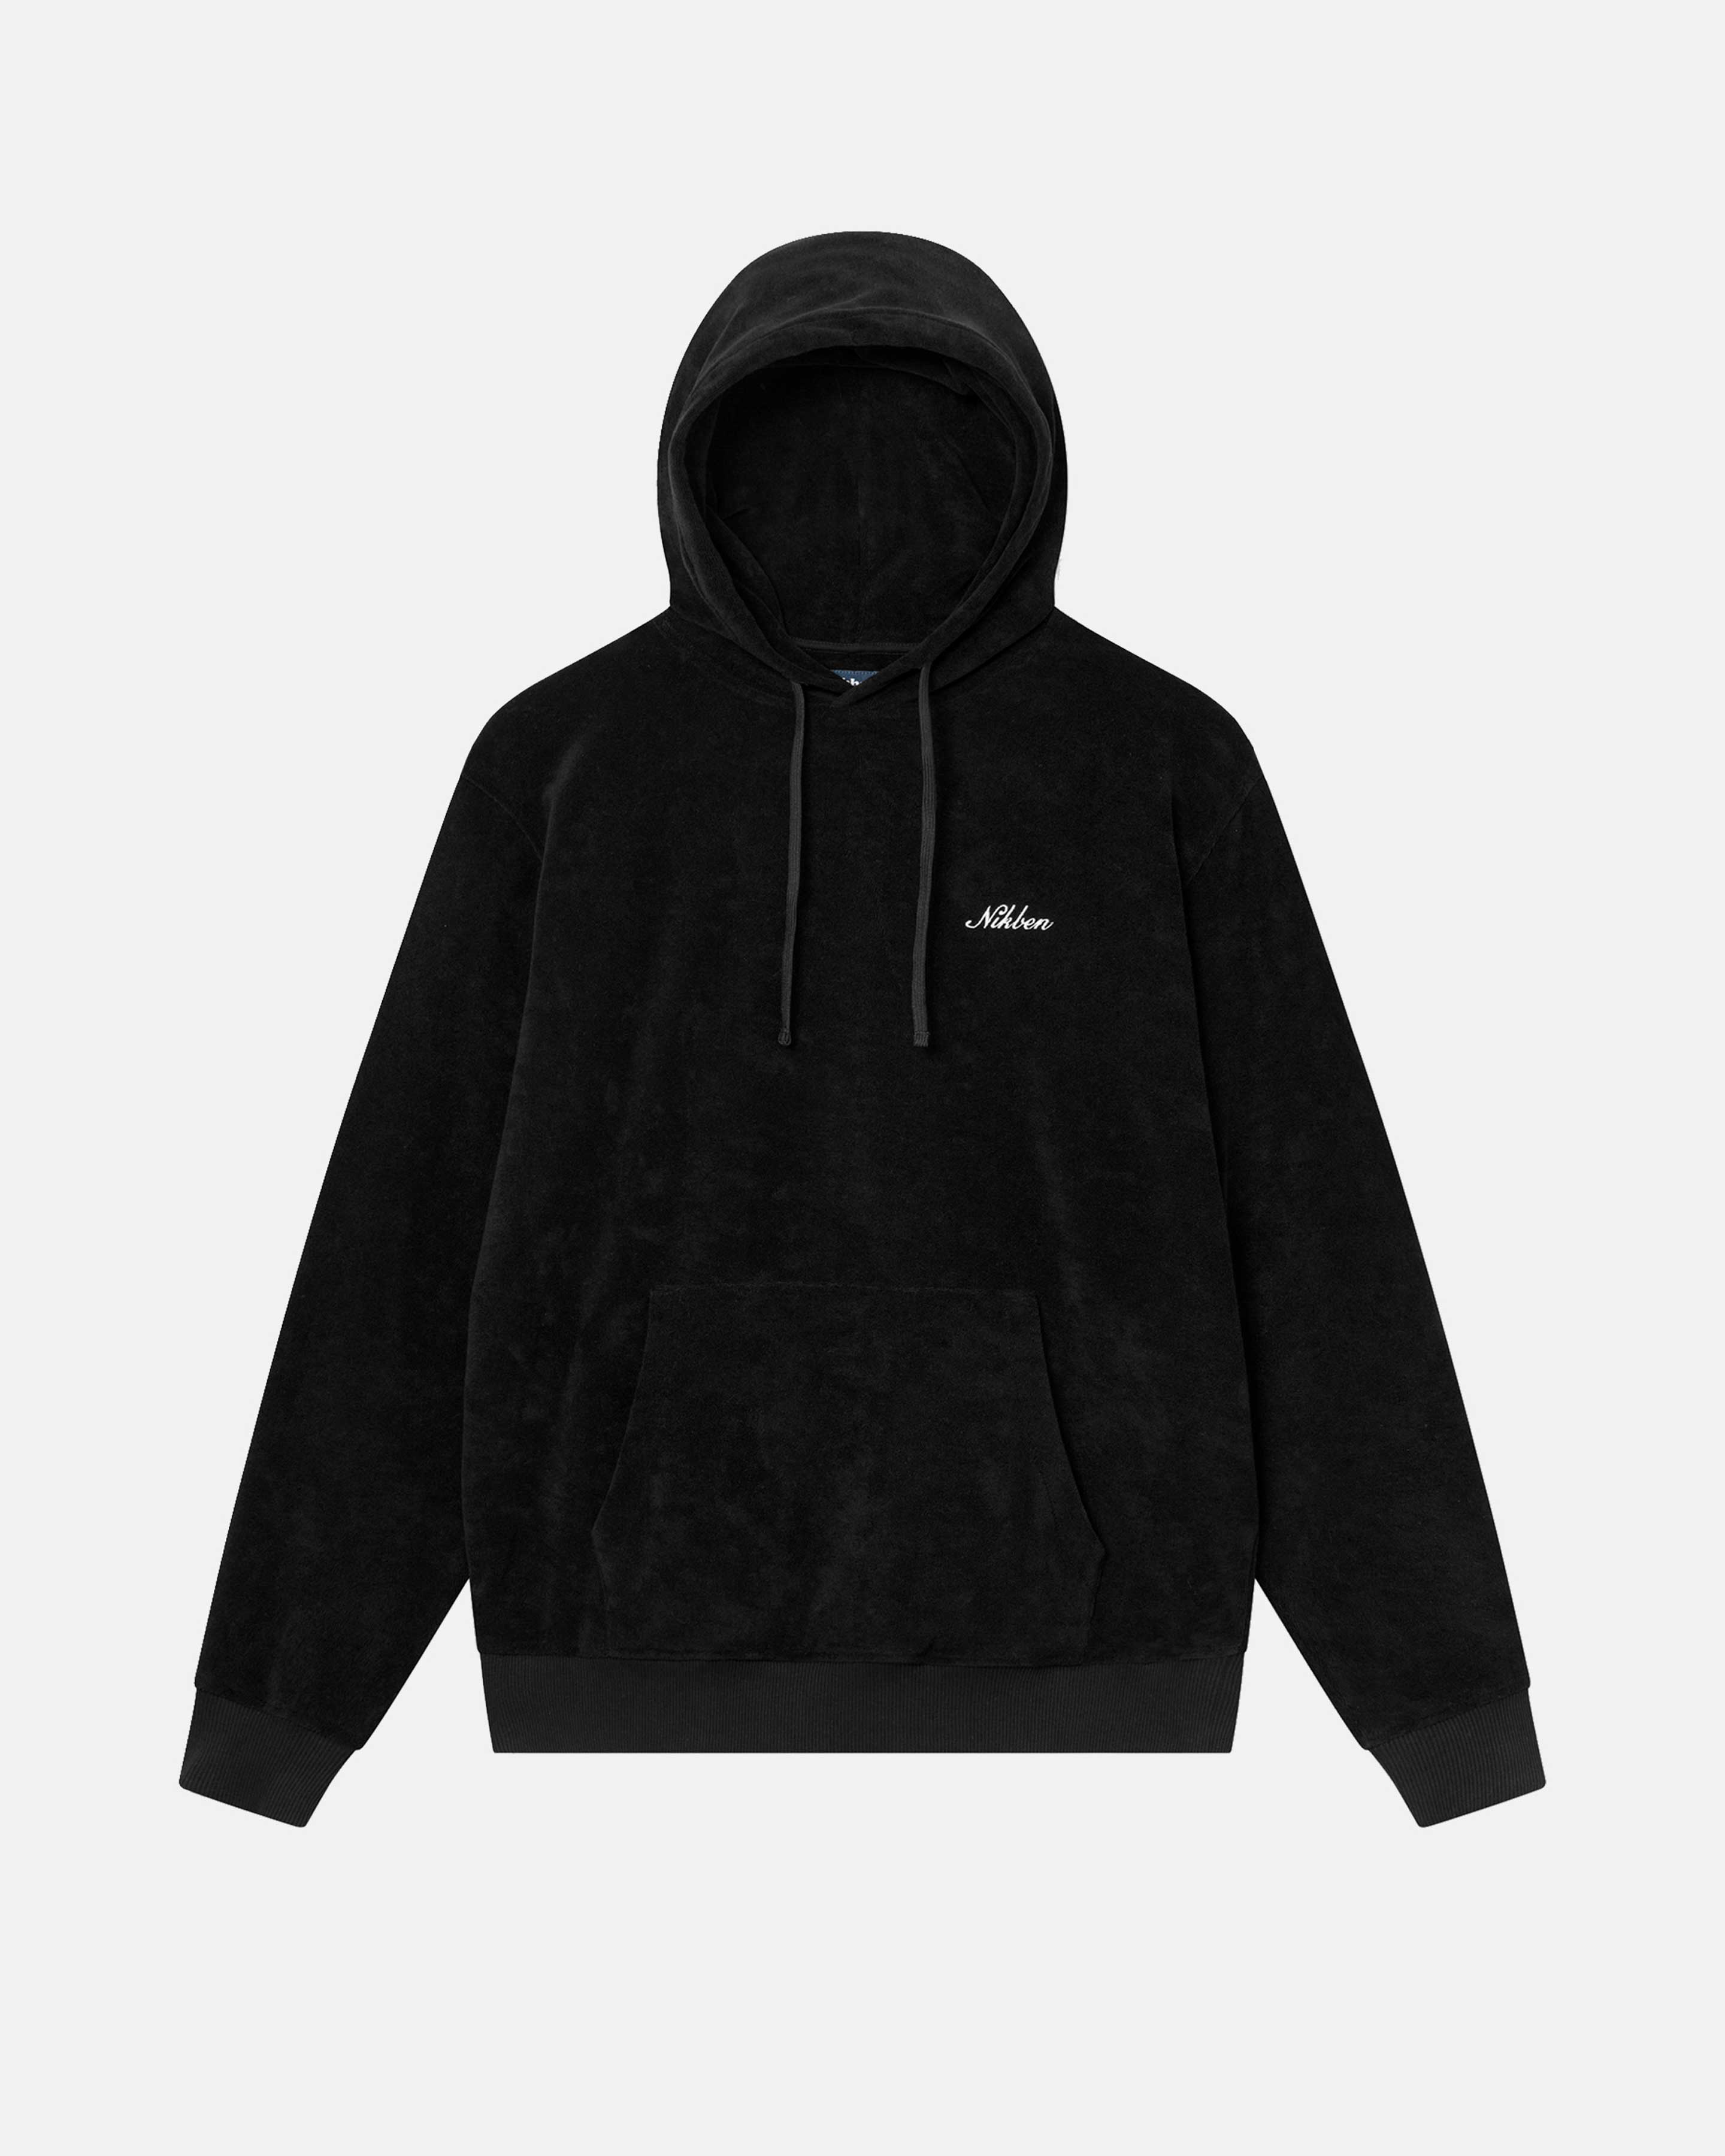 Black hoodie made from terry toweling cloth. It features drawstrings, a single front pocket, and a stitched "Nikben" logo on the chest.